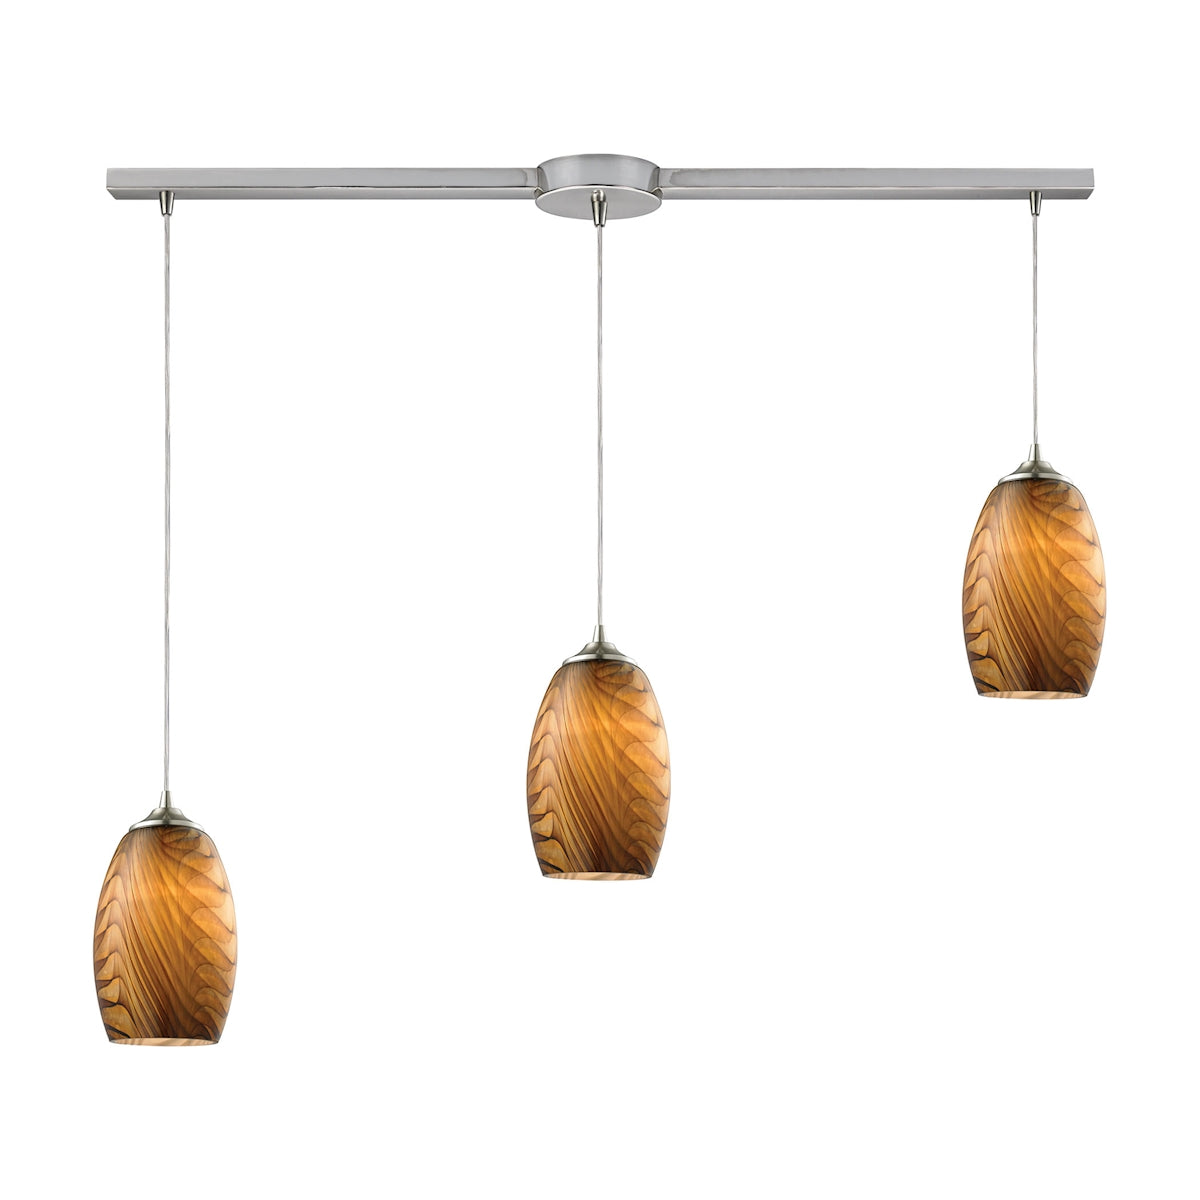 ELK Lighting 31630/3L Tidewaters 3-Light Linear Pendant Fixture in Satin Nickel with Amber Glass